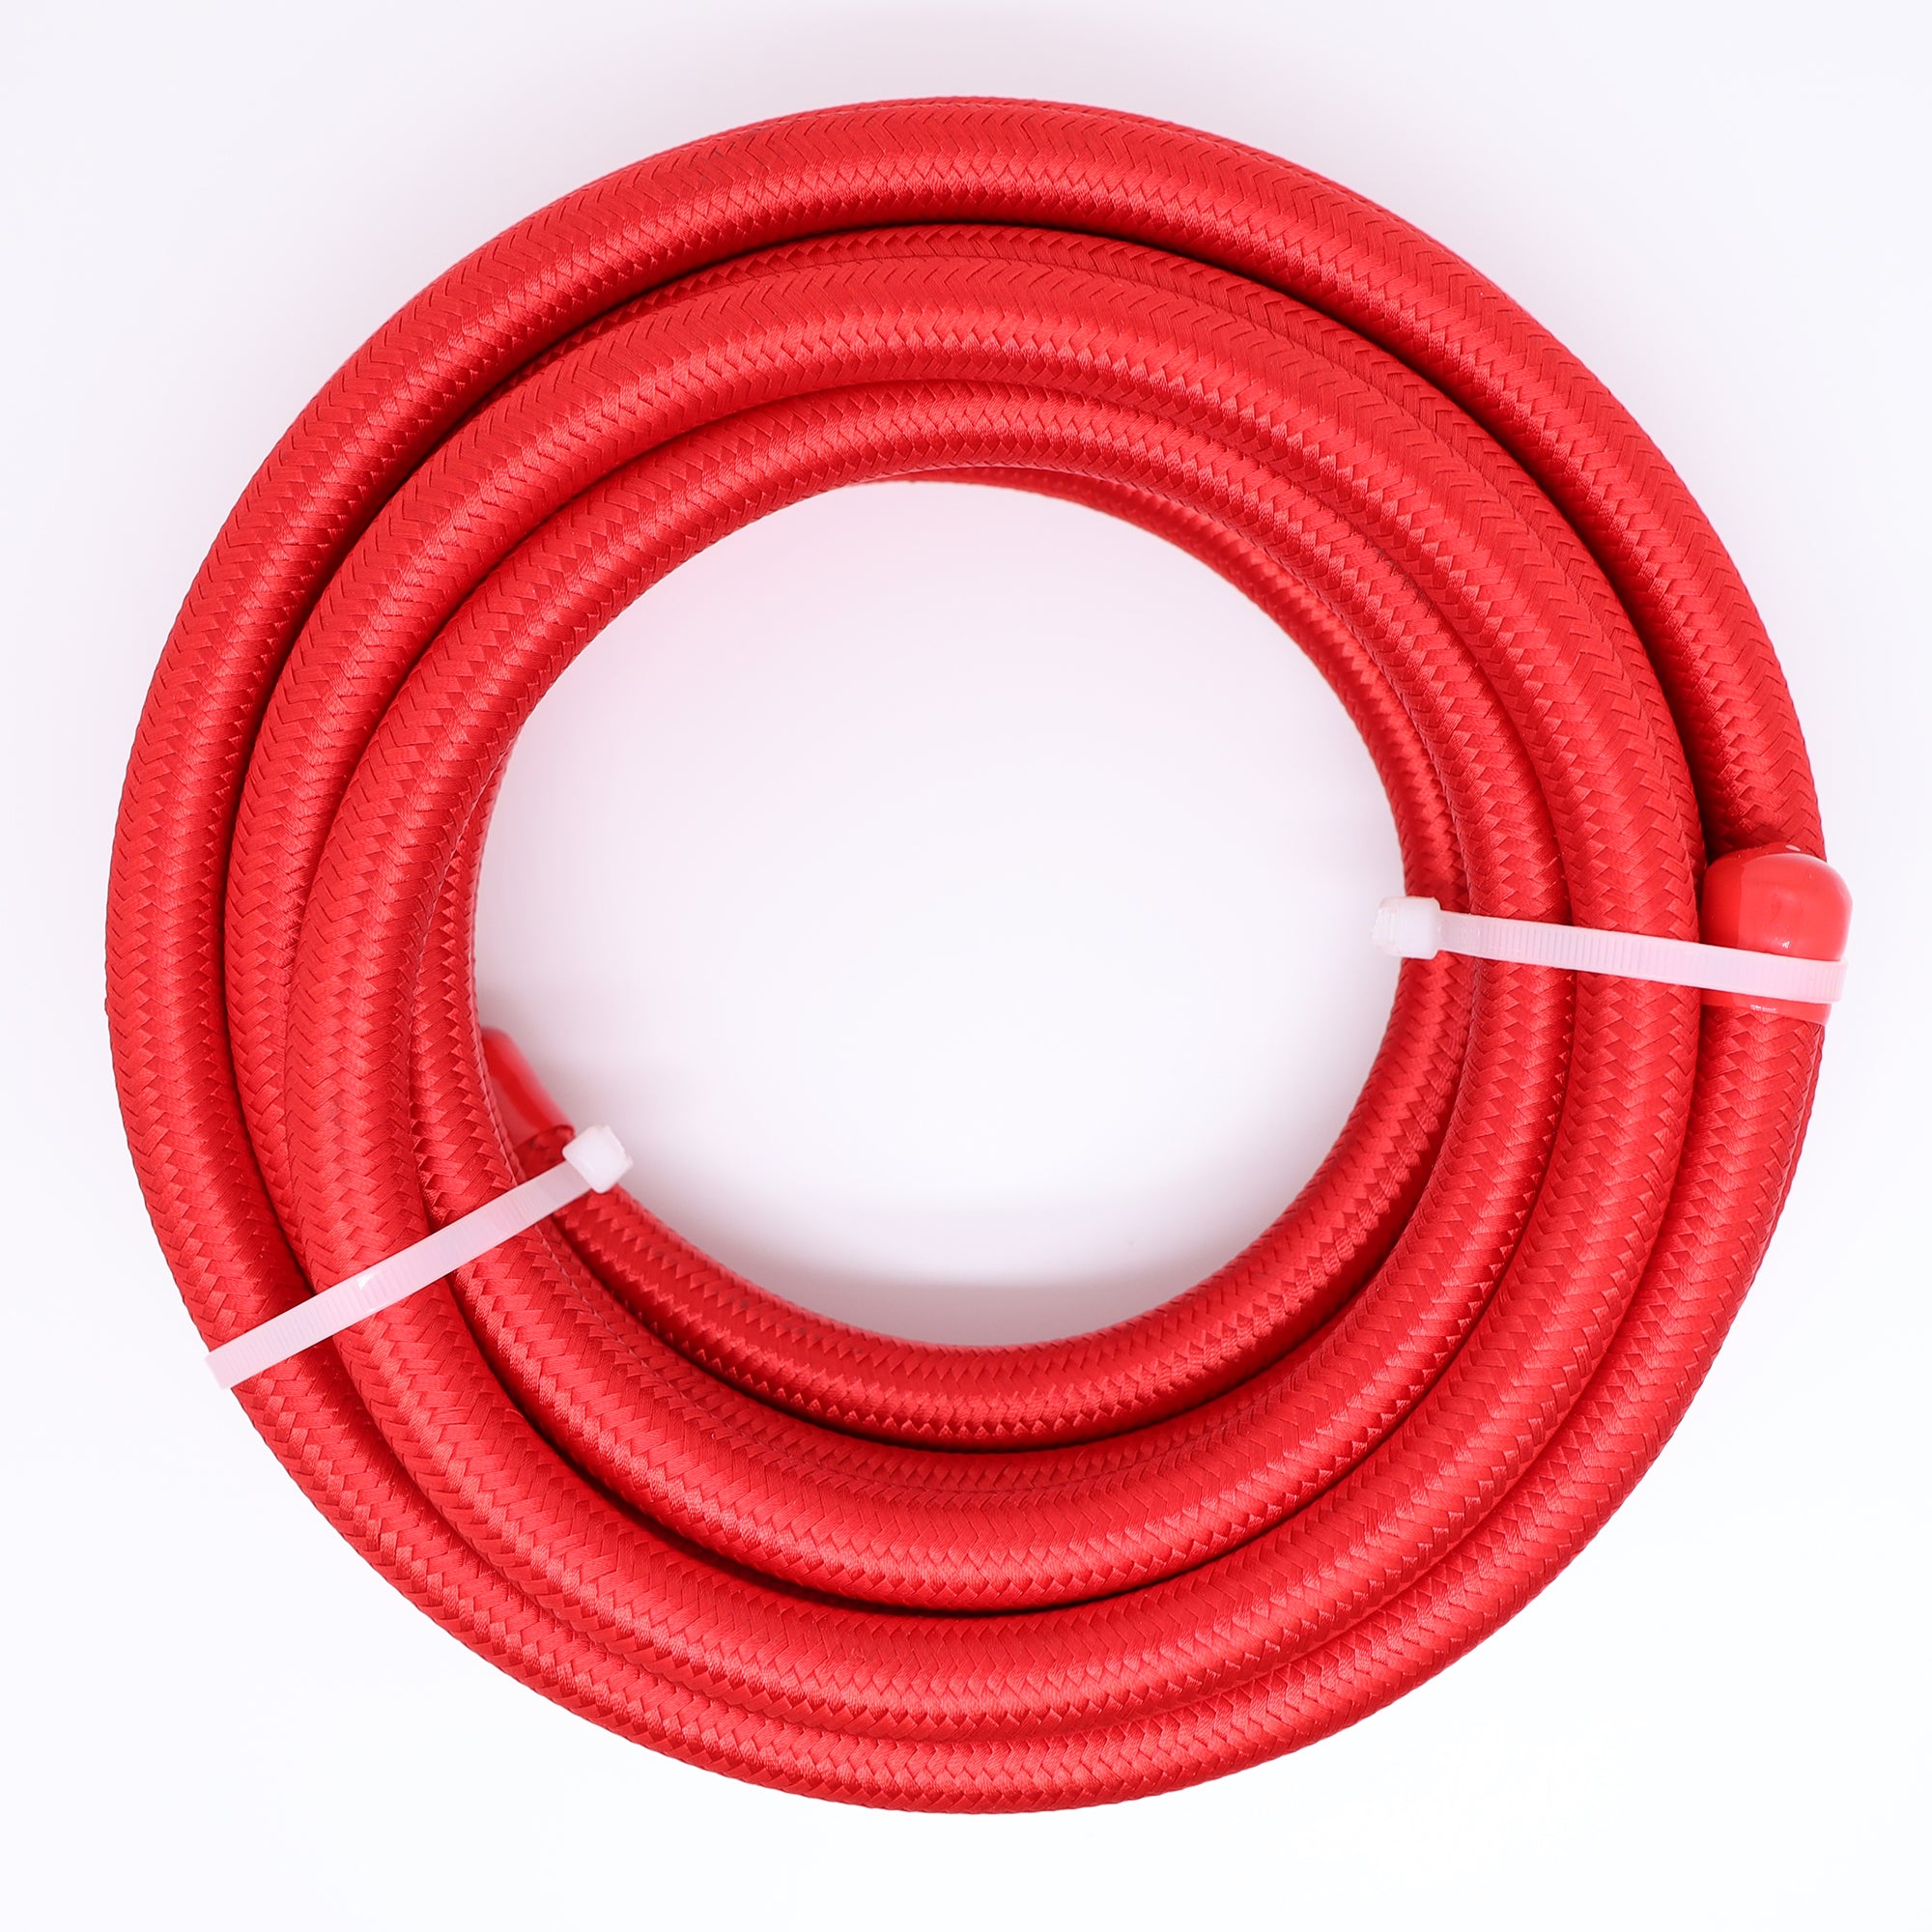 Nylon Stainless Steel Braided PTFE Fuel Hose - Blue/Red/Black 5/8 16mm ID - PTFE 20ft Hose / Red